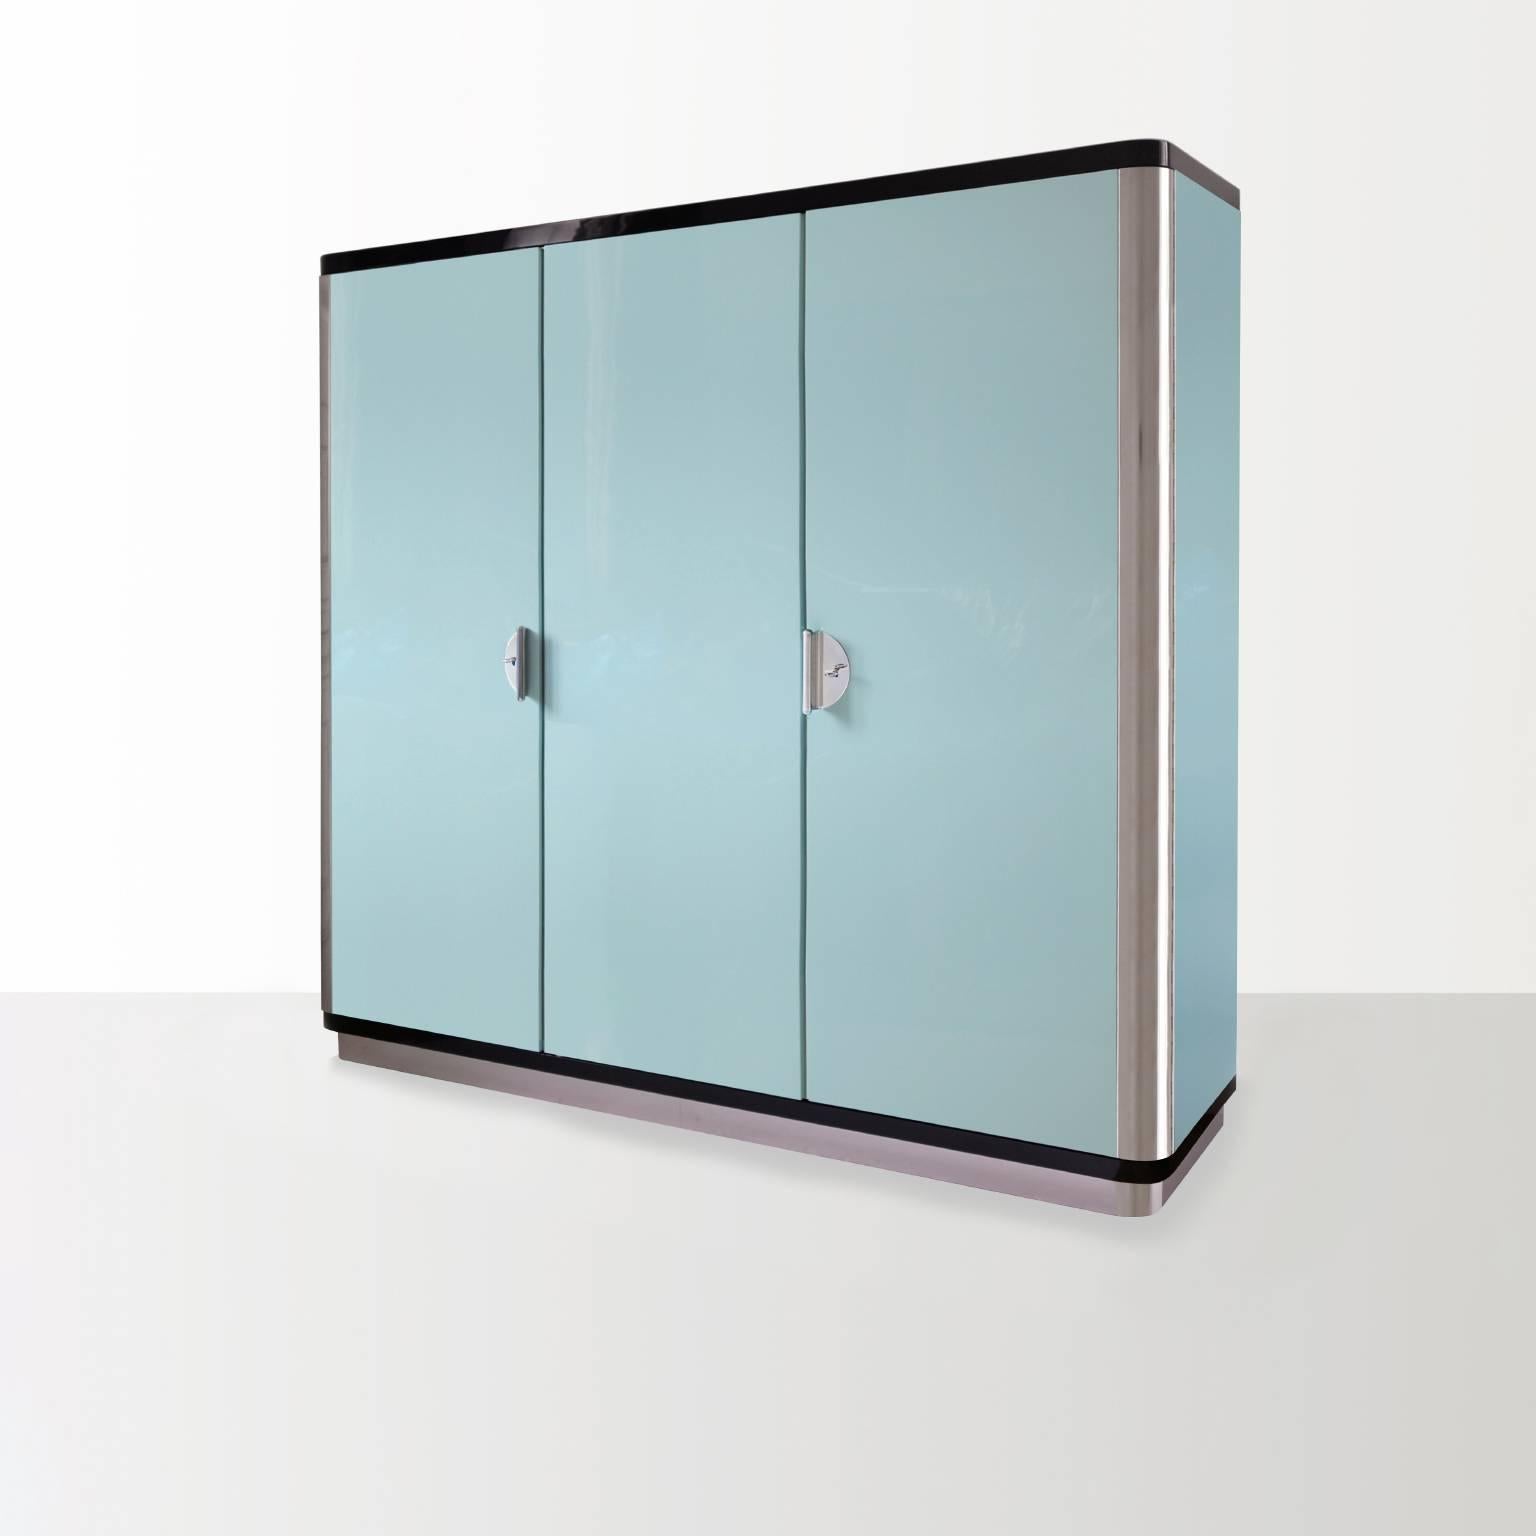 Customized three-door wardrobe, manufactured by GMD Berlin, exclusively presented in our Rudolf Vichr Collection.

These high-quality, handmade furniture in a classic modern timeless design, are made from selected materials according to